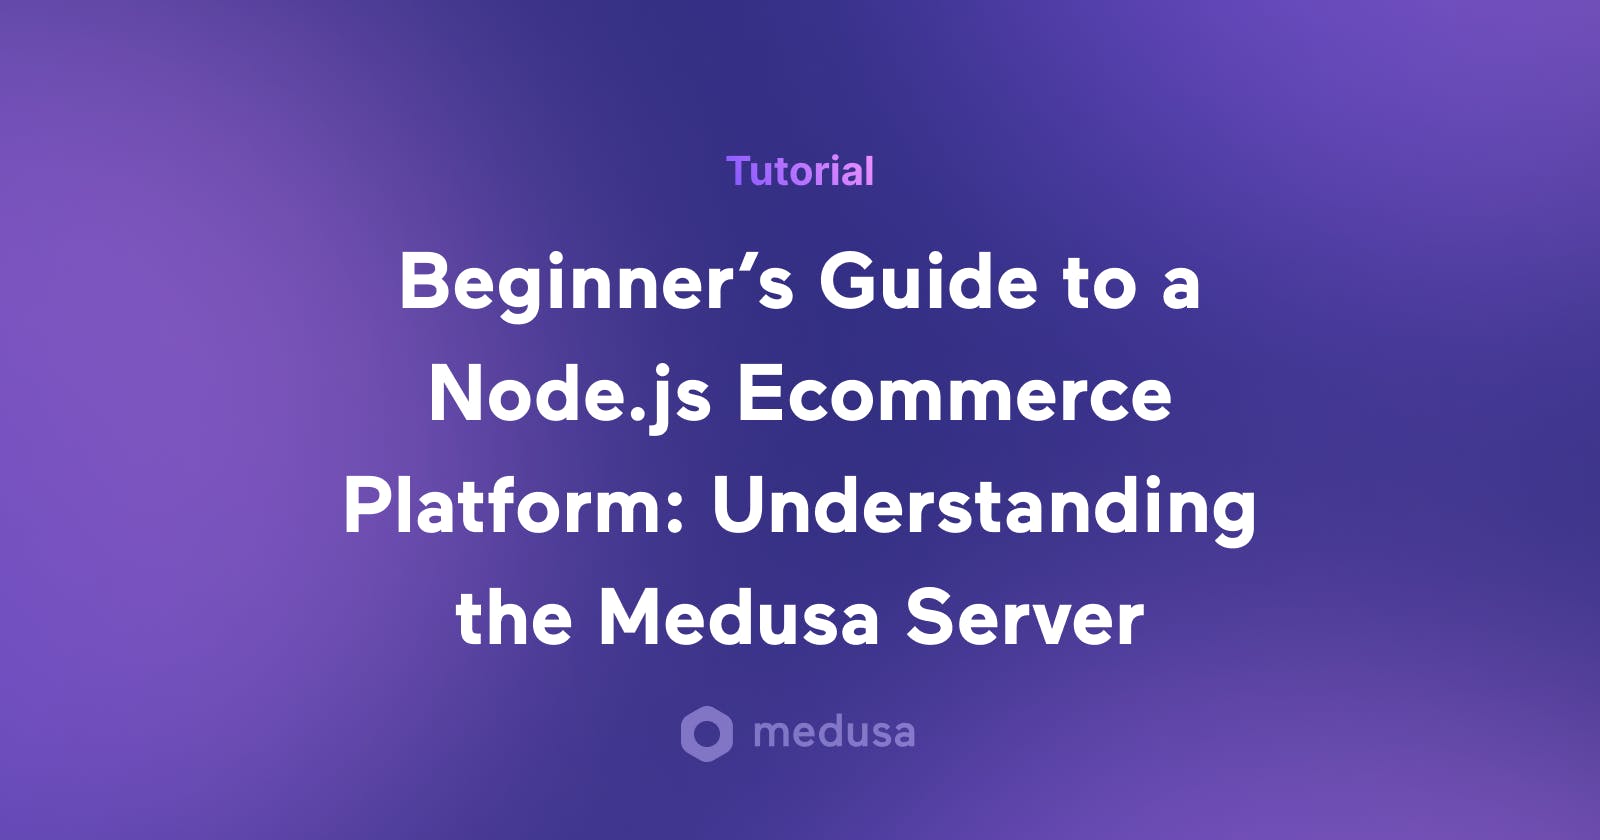 Interested in Medusa? Here’s a Simple Guide for Beginners